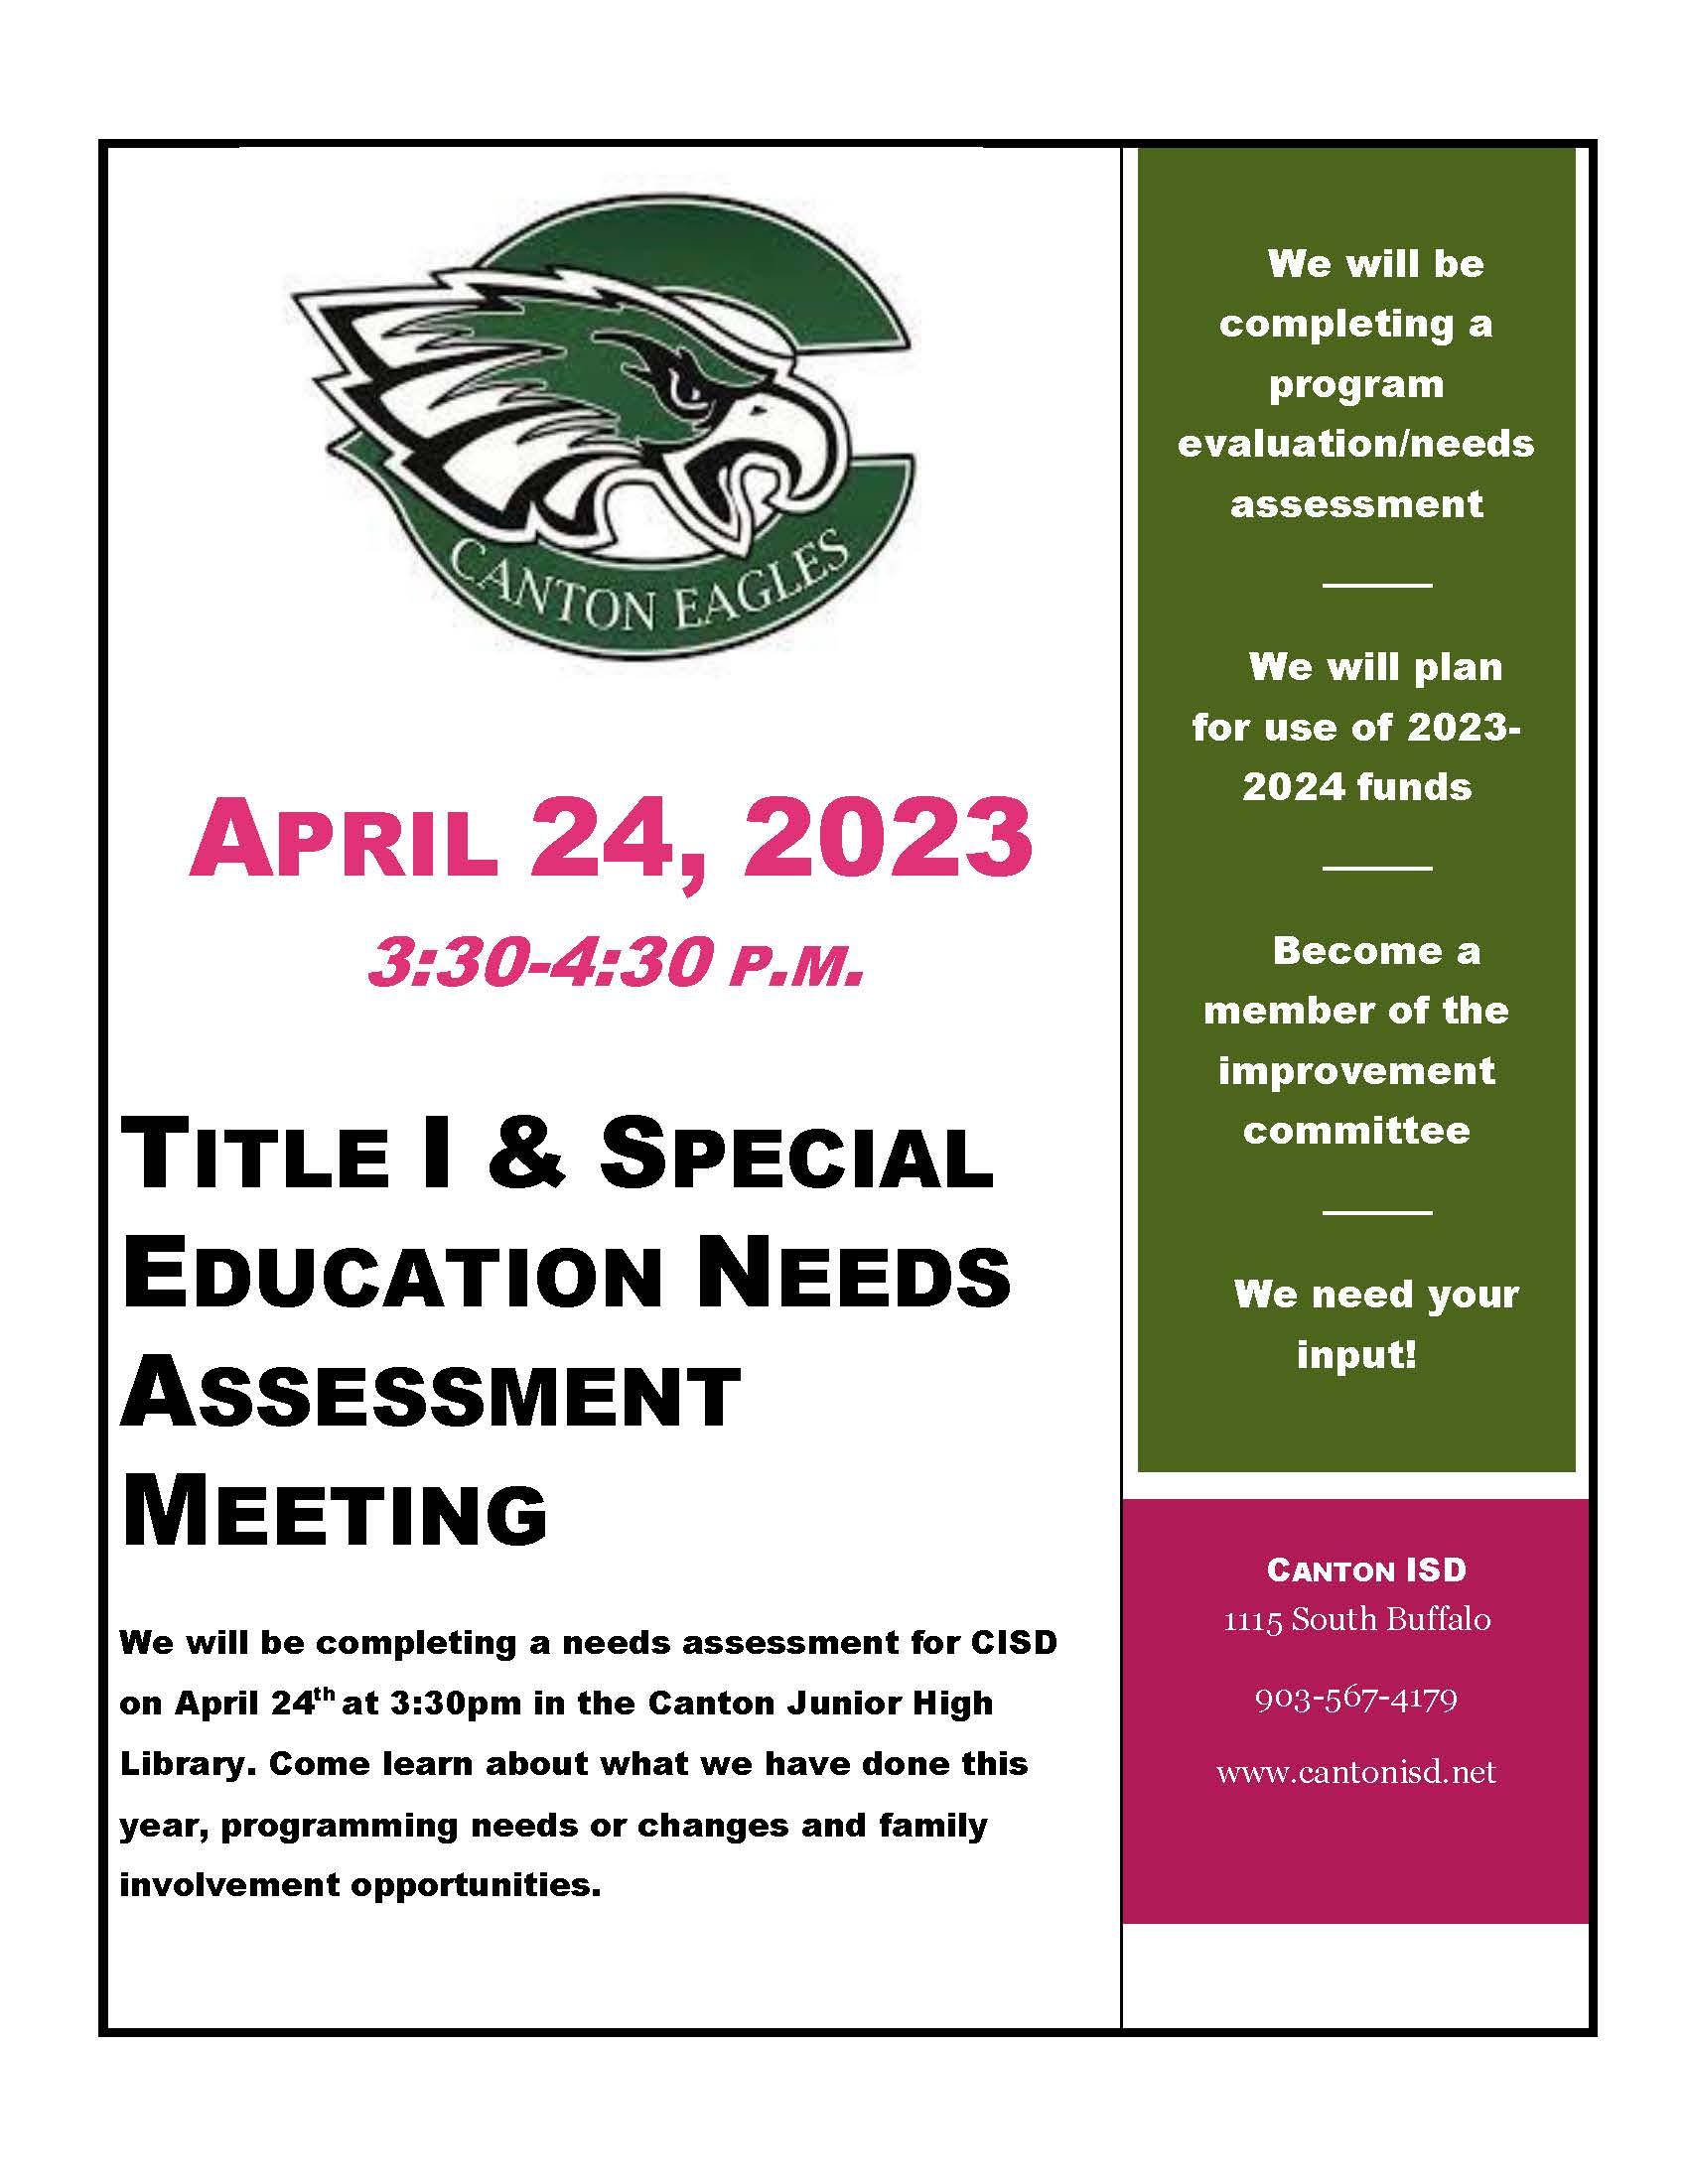 Title 1 & Special Education Needs Assessment Meeting